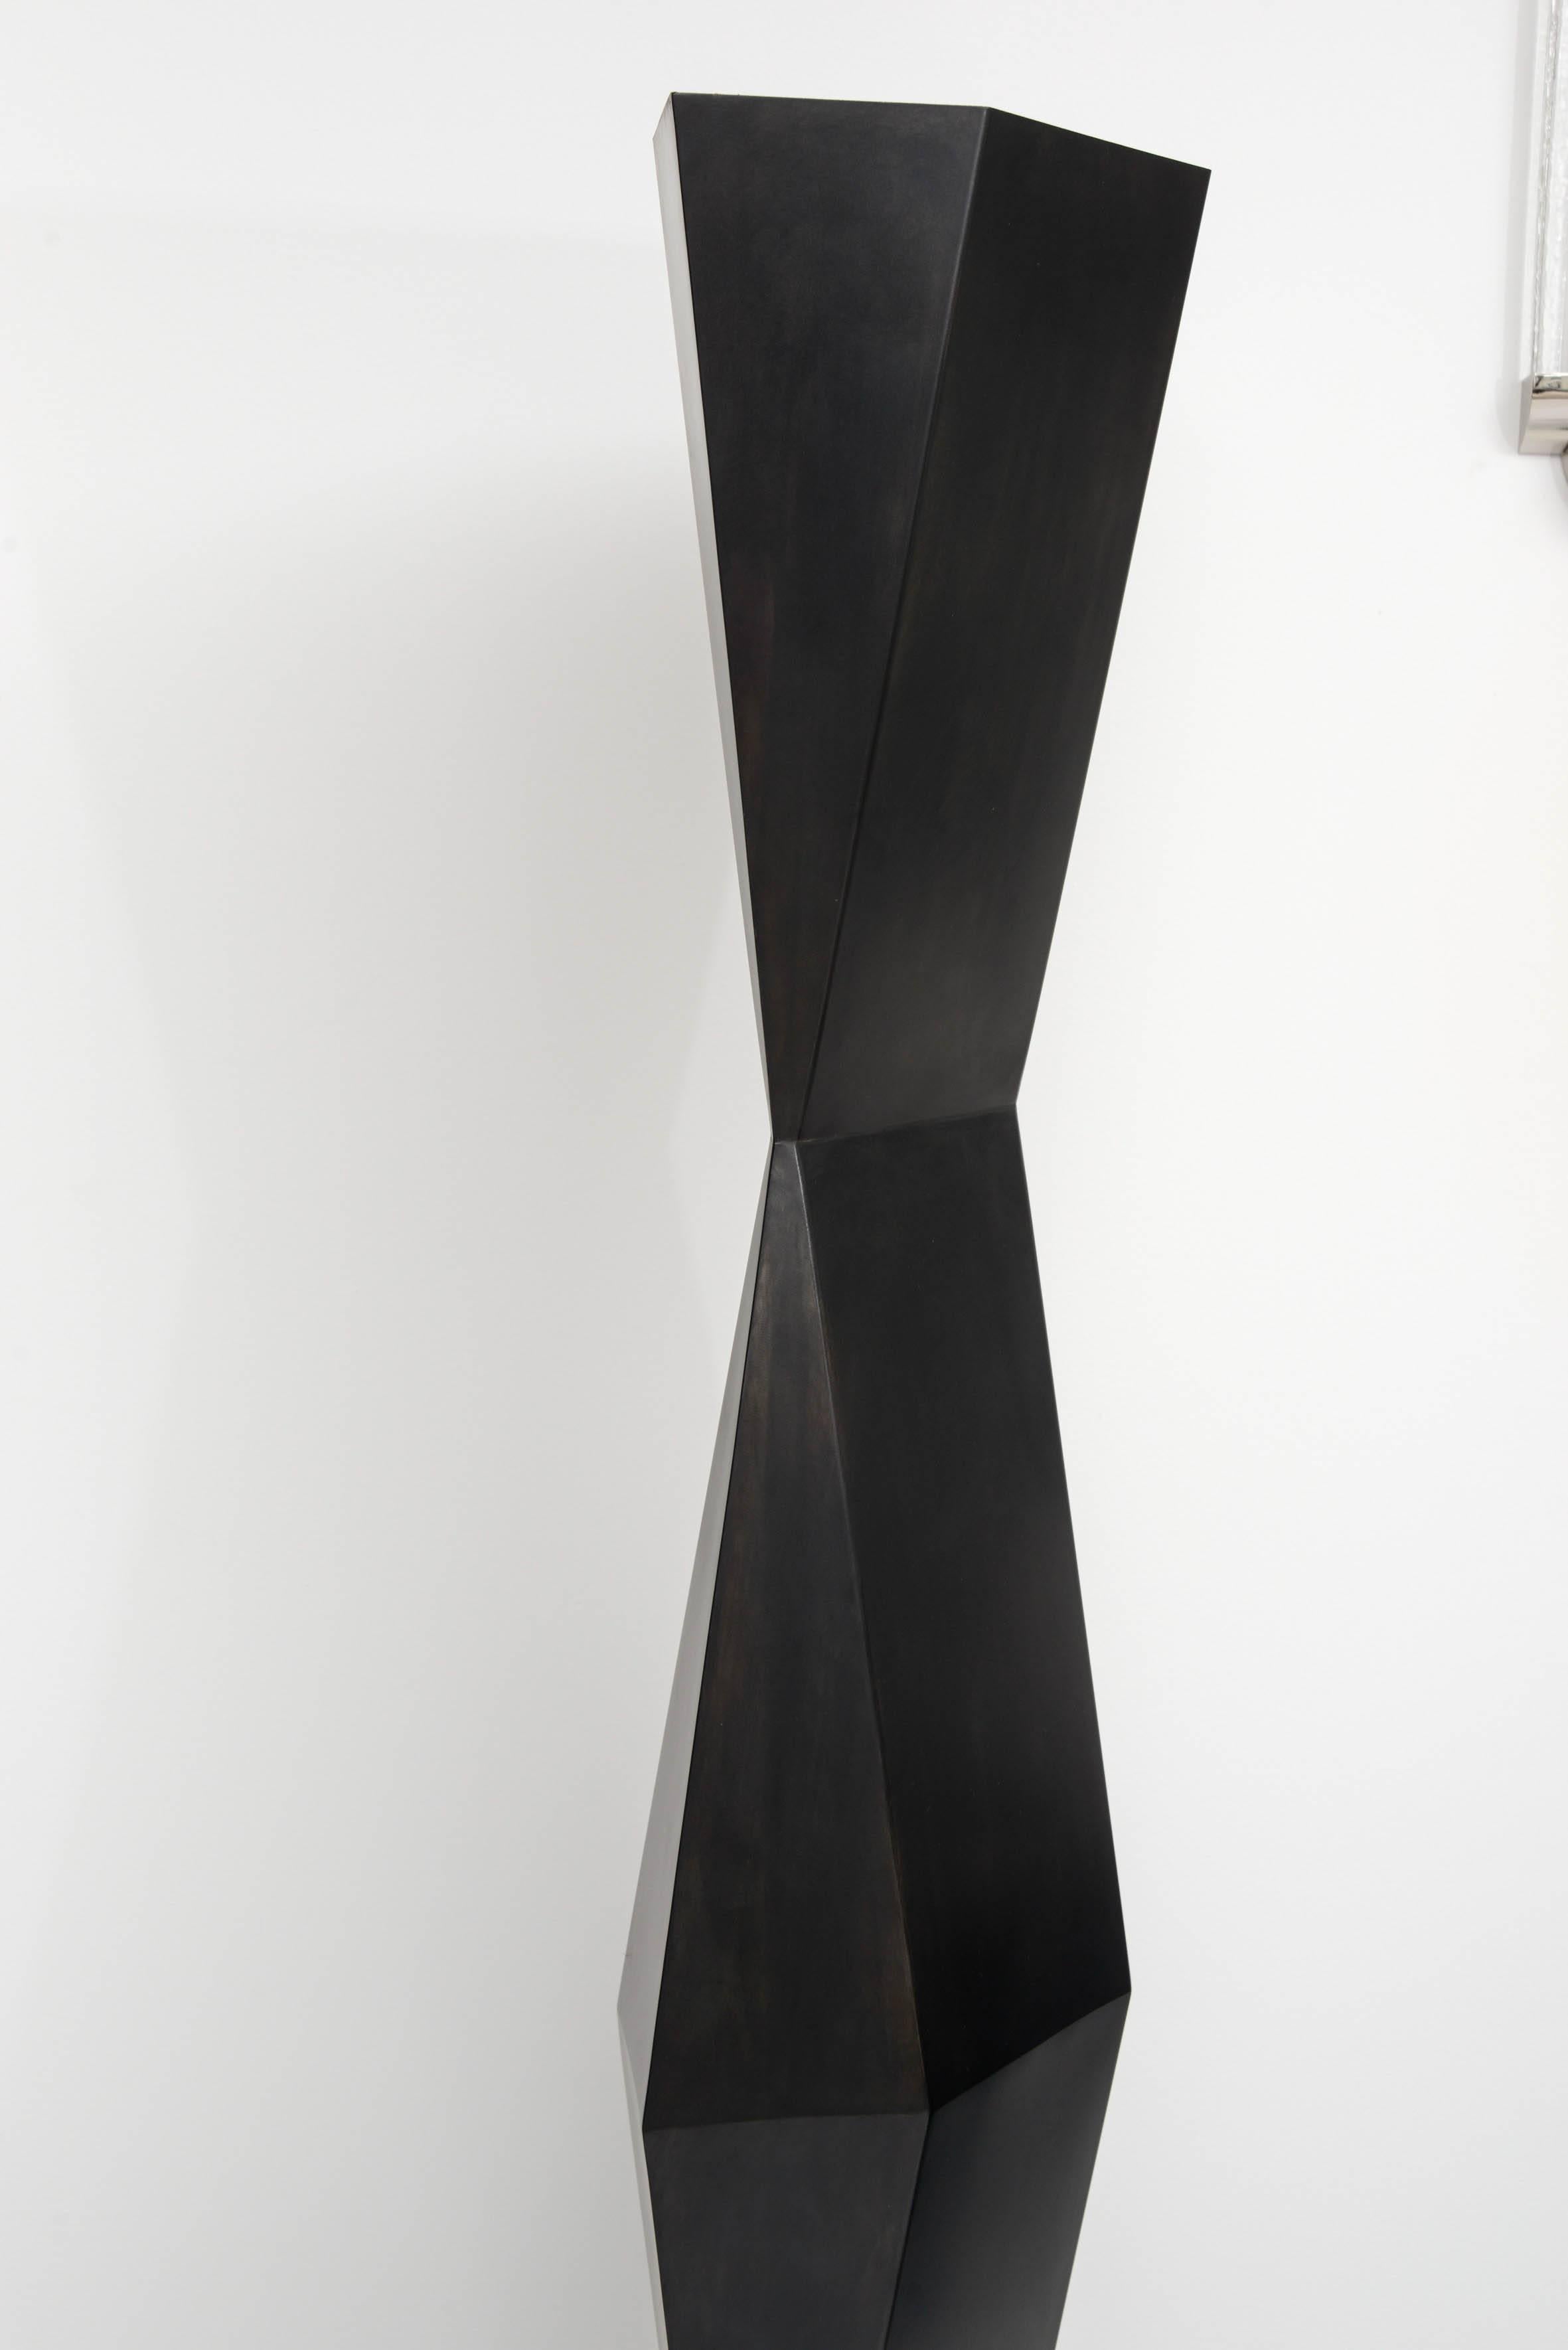 Contemporary Floor Lamp TOTEM by Stephane Ducatteau for Fortuna For Sale